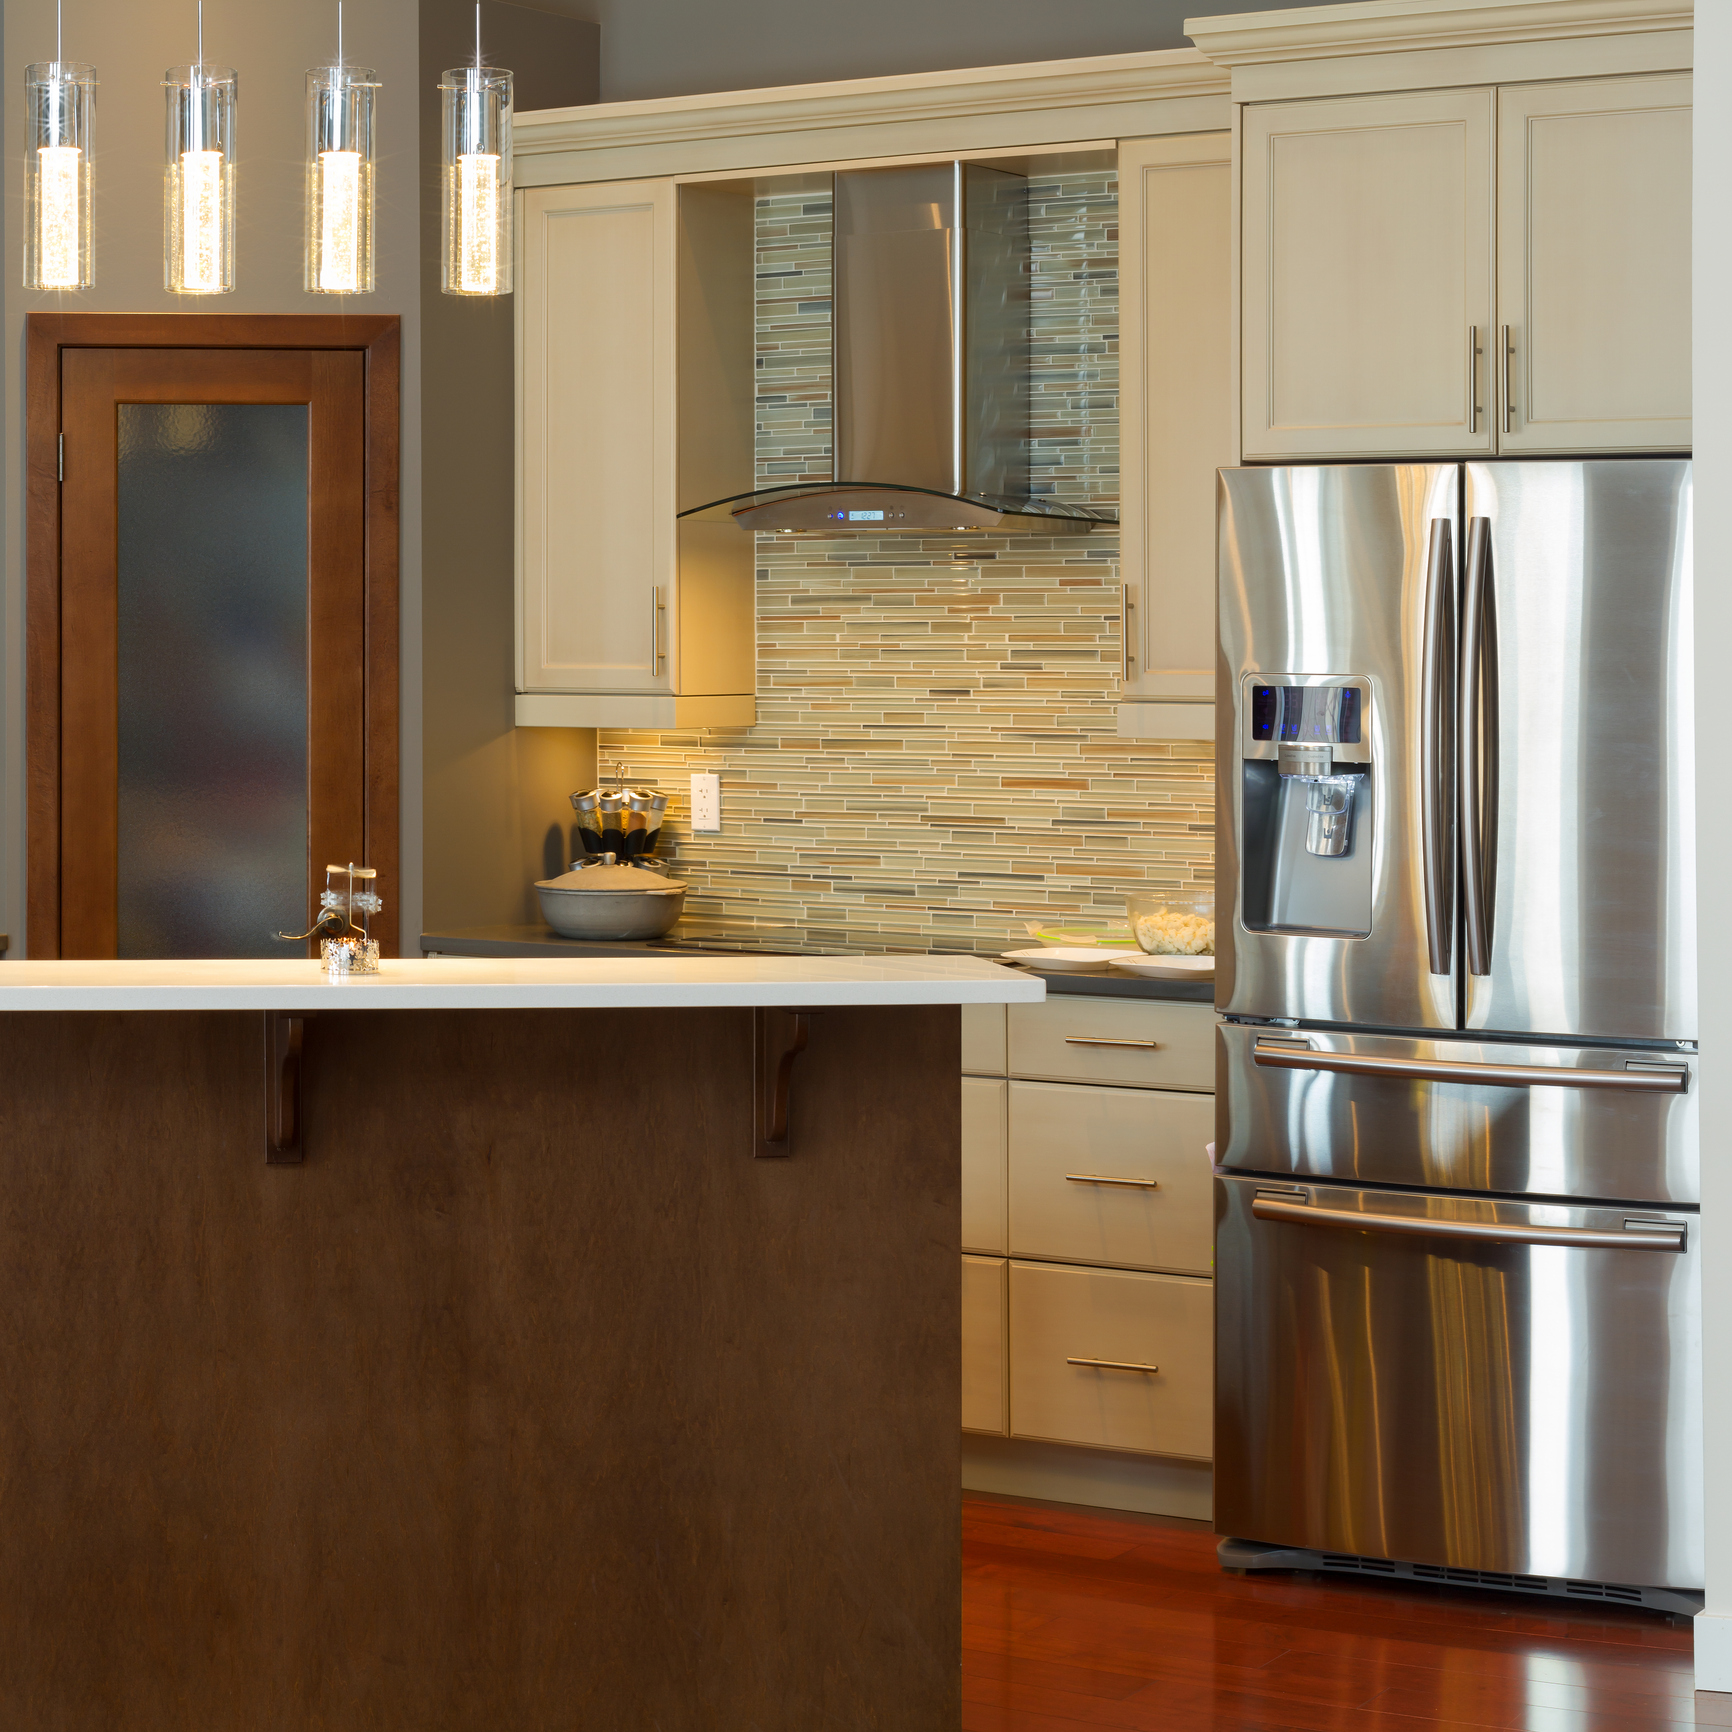 An image showing a newly remodeled kitchen with custom cabinets and countertops.